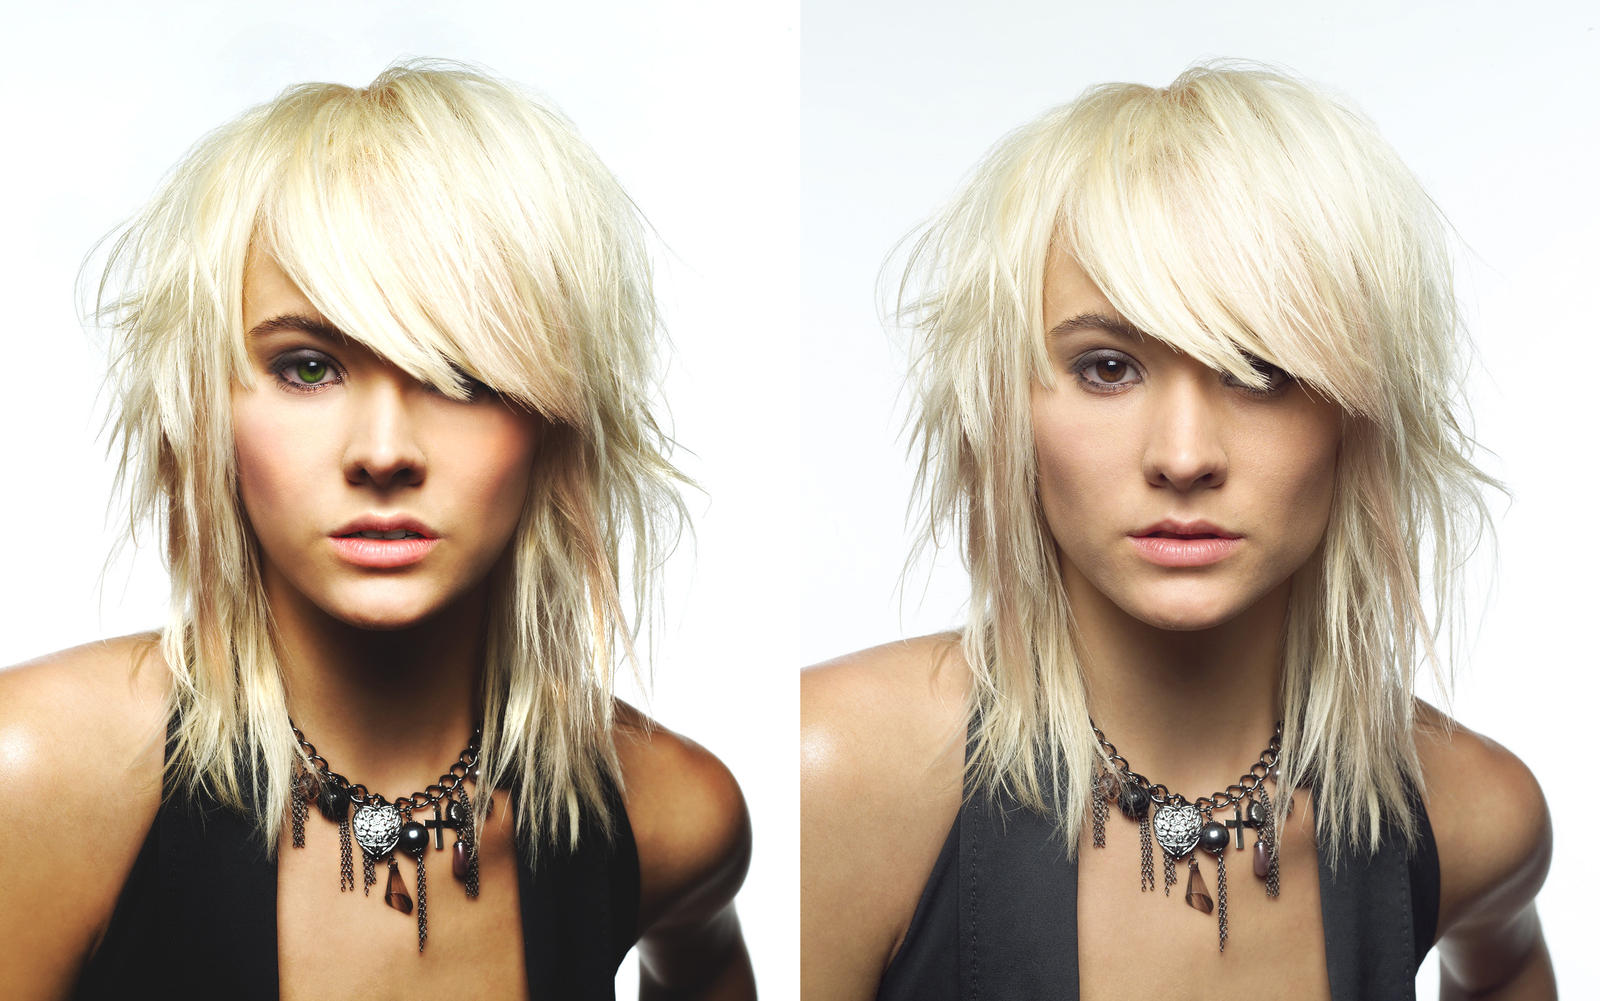 Girl with Tousled Hair Retouch